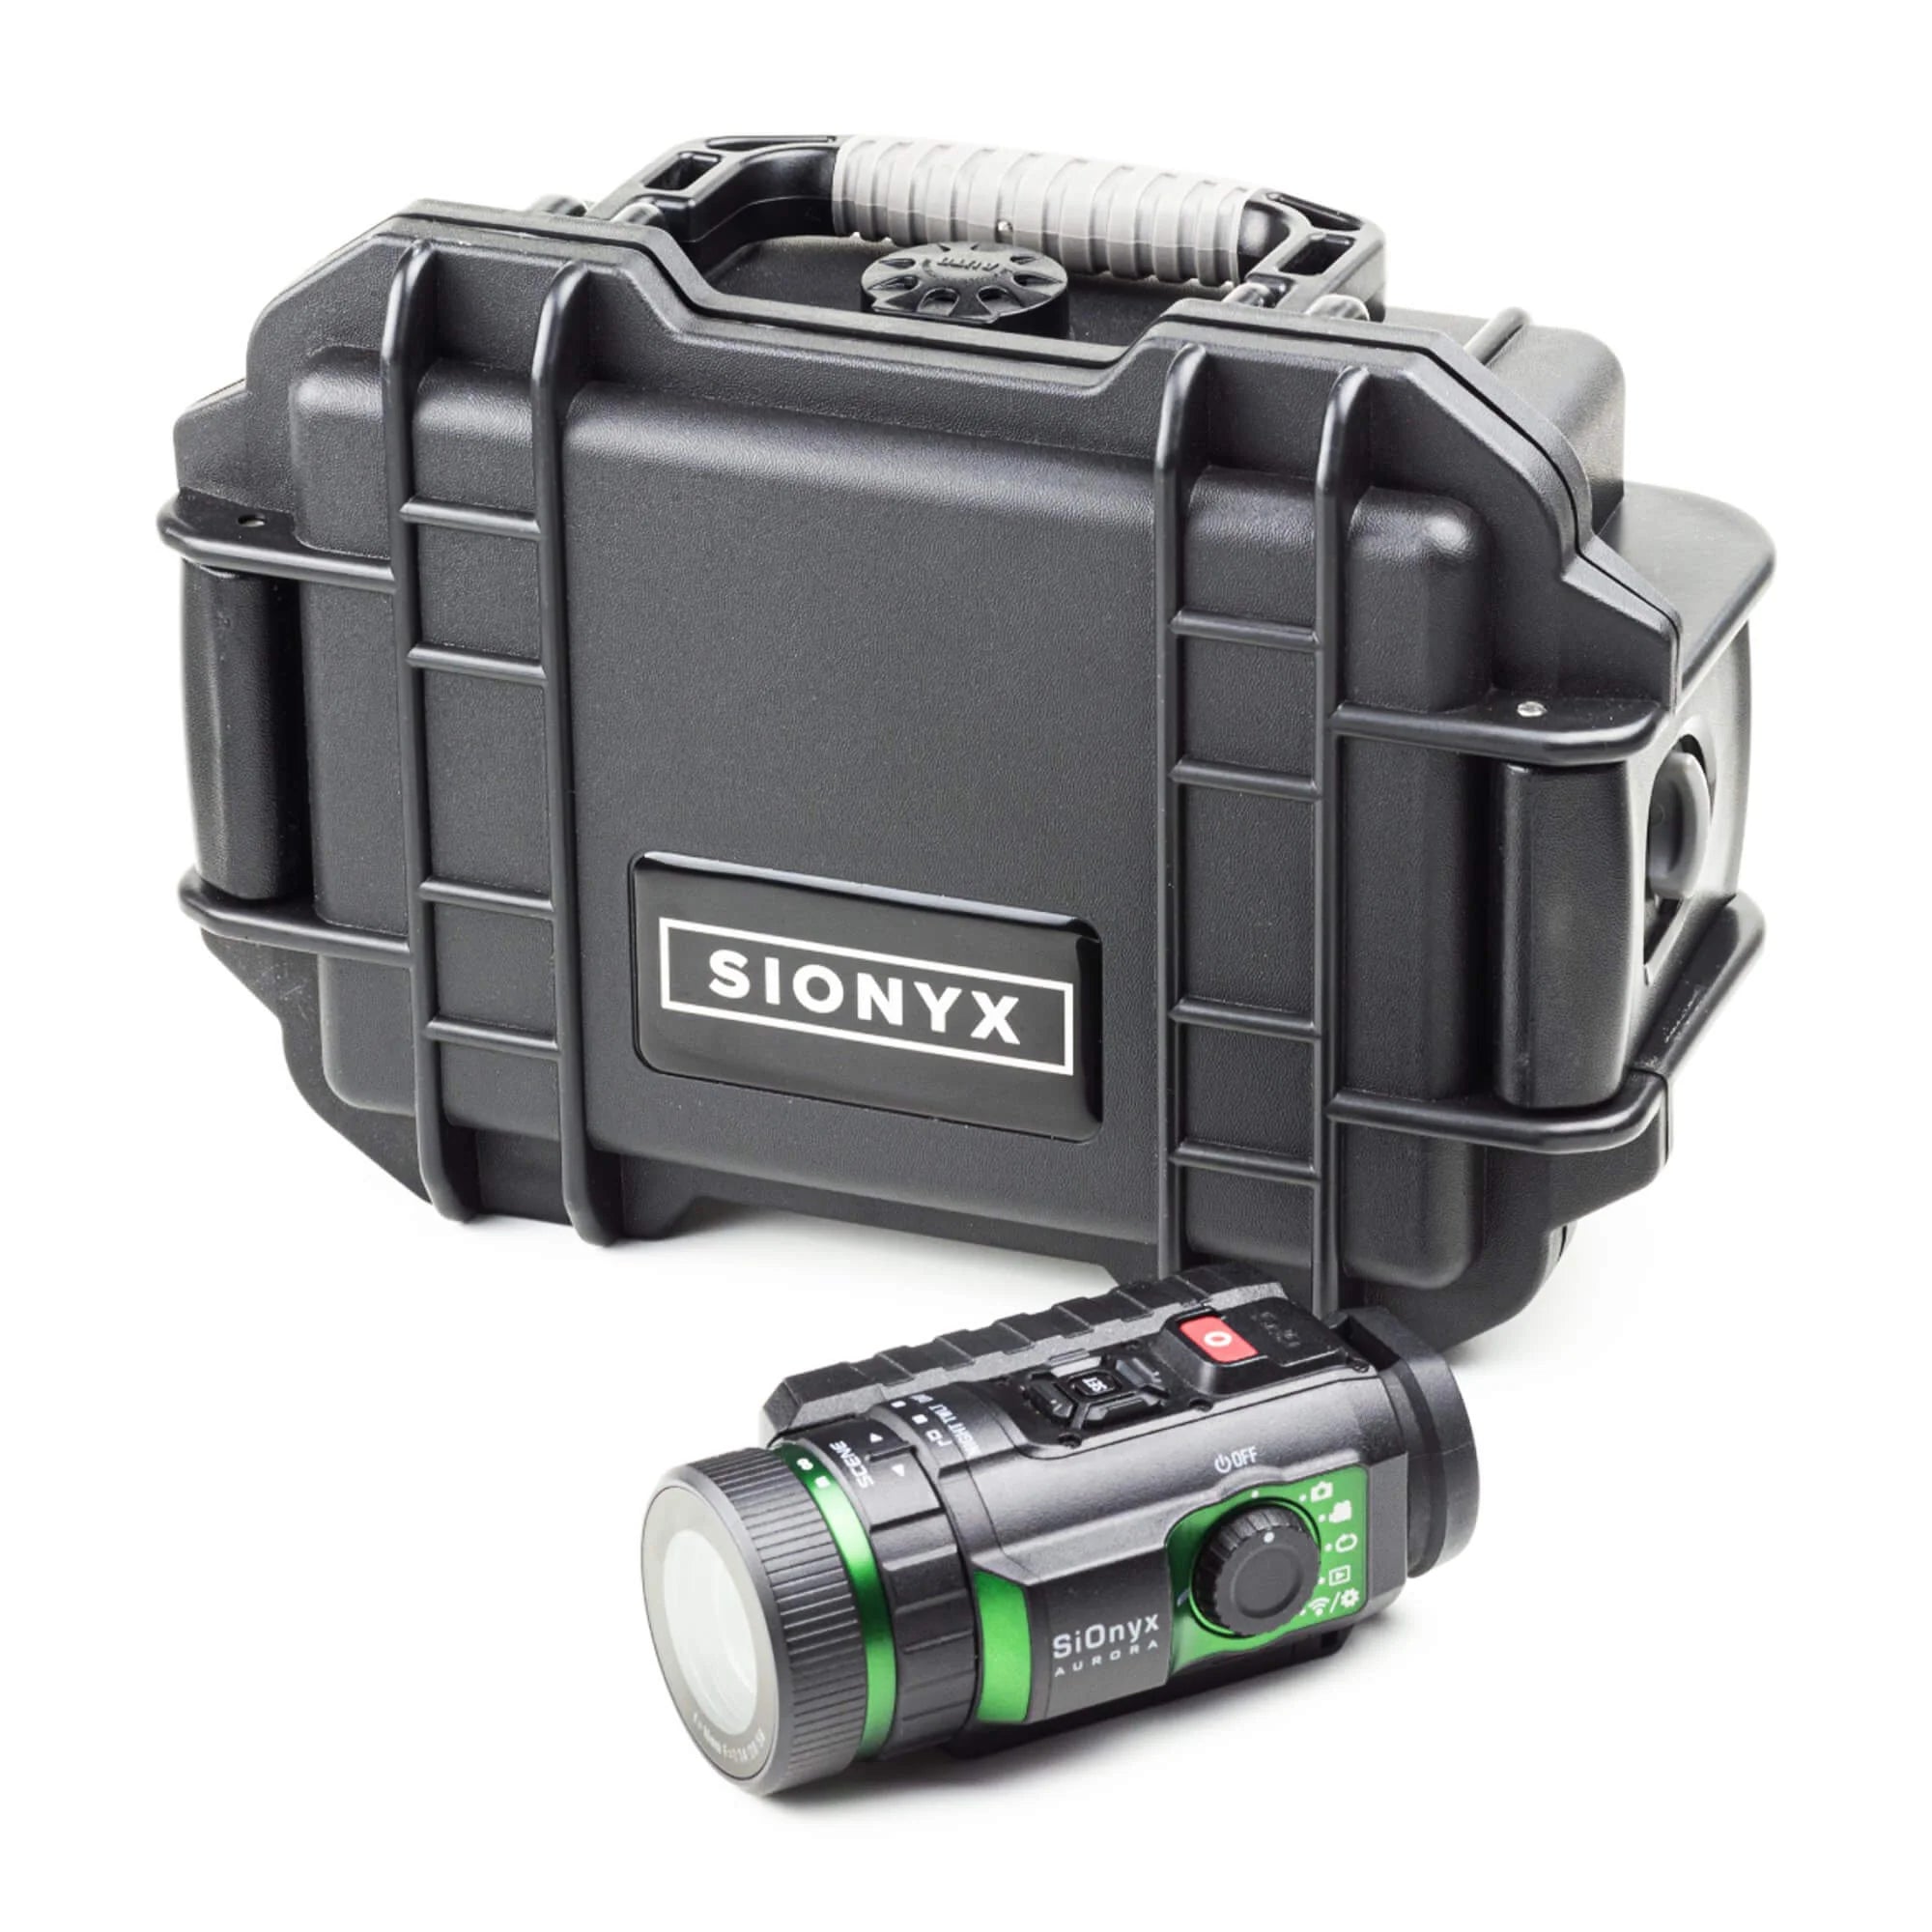 SiOnyx Aurora Colour Action IR Night Vision Camera with Hard Case